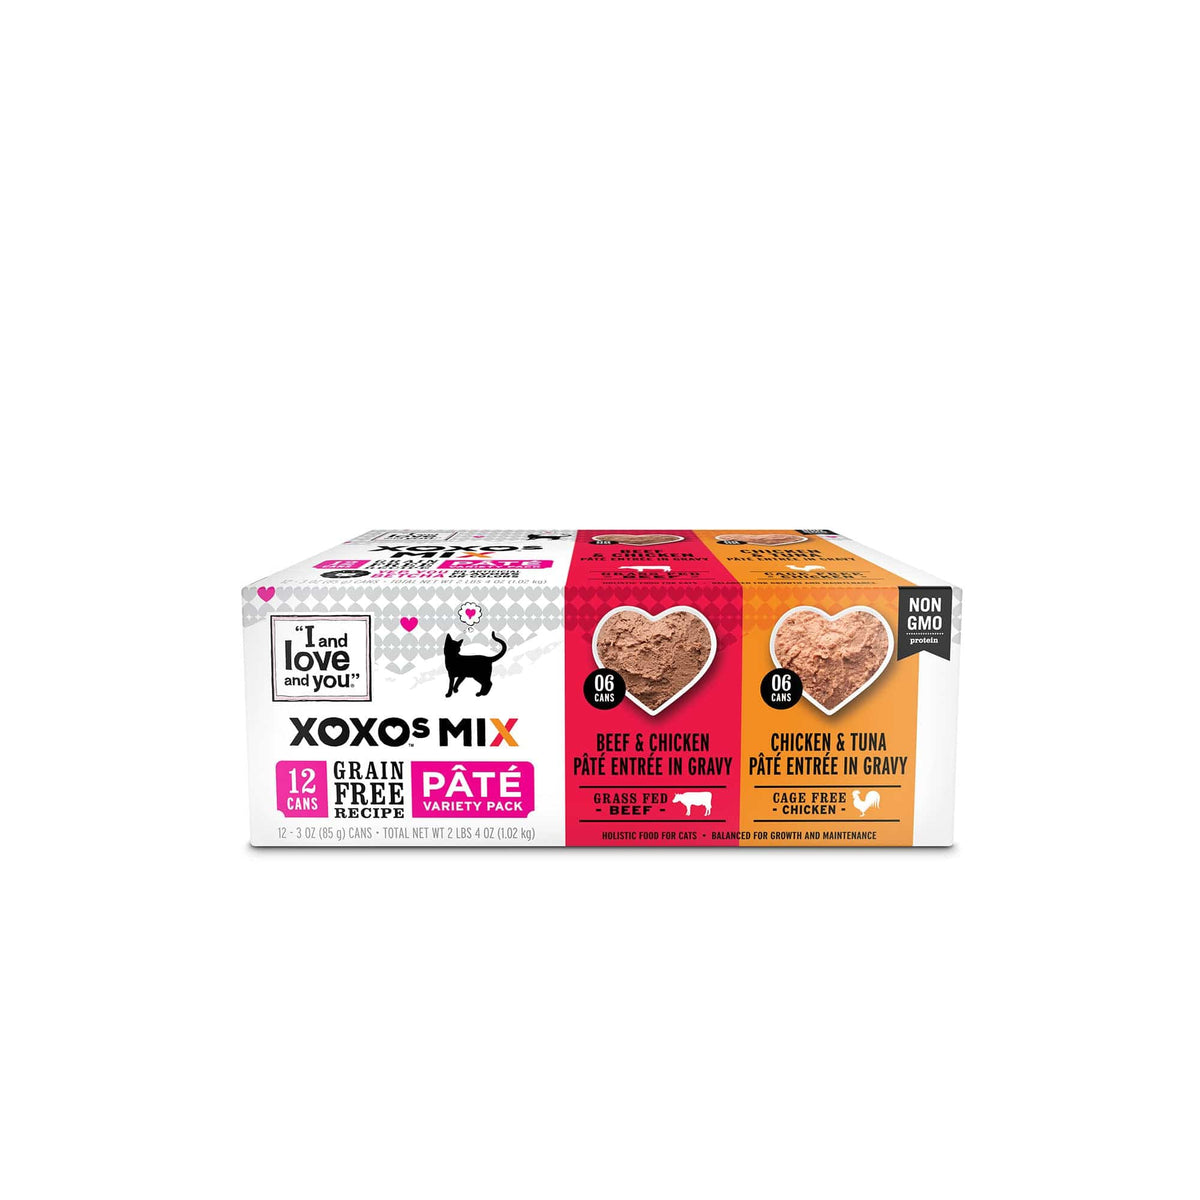 A variety pack of moist canned pâté with chicken & tuna and beef & chicken flavors, perfect for your cat's mealtime excitement.